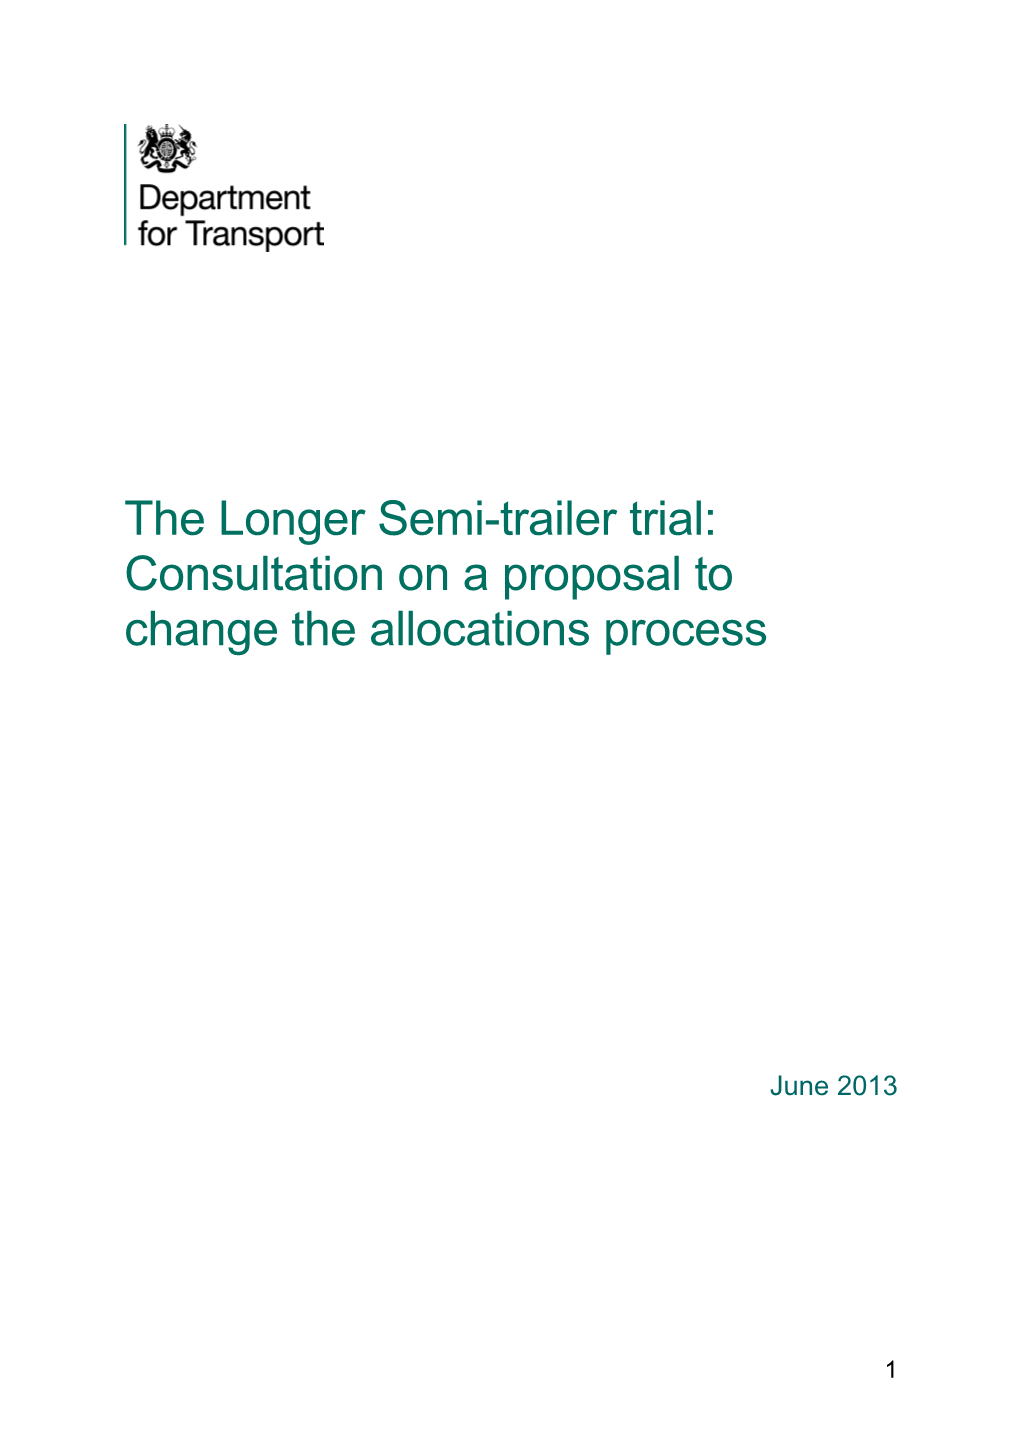 The Longer Semi-Trailer Trial: Consultation on a Proposal to Change the Allocations Process